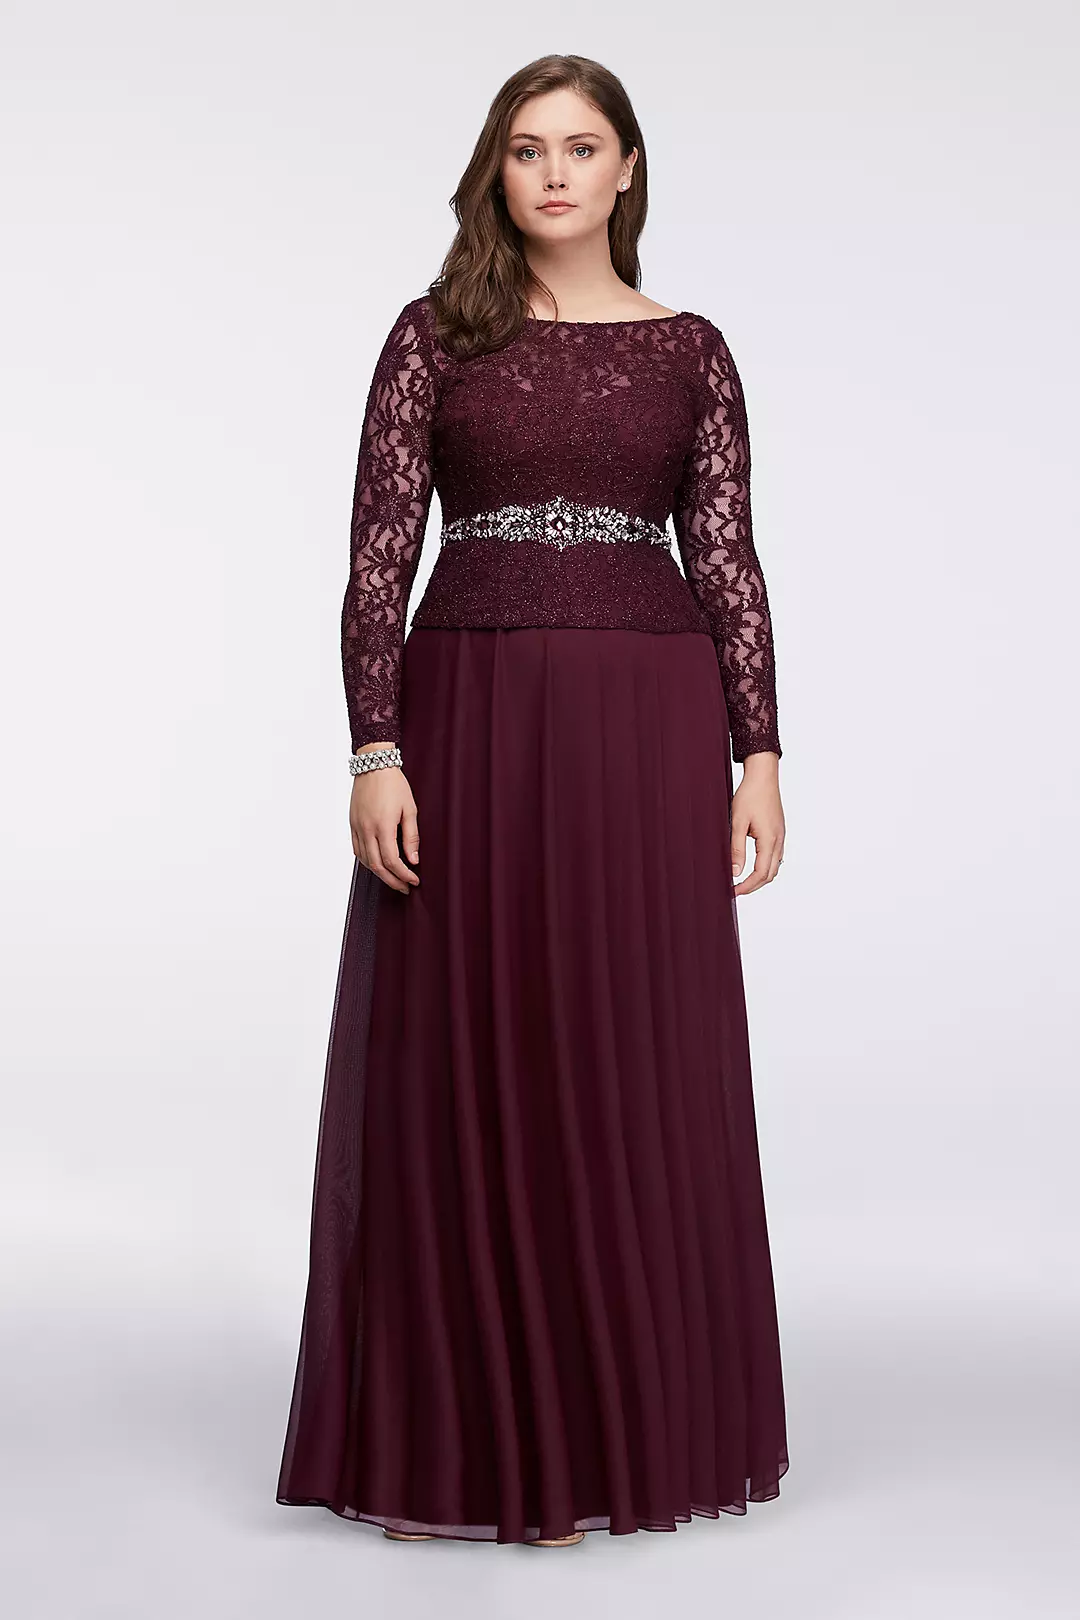 Long-Sleeve Lace Bodice Gown Image